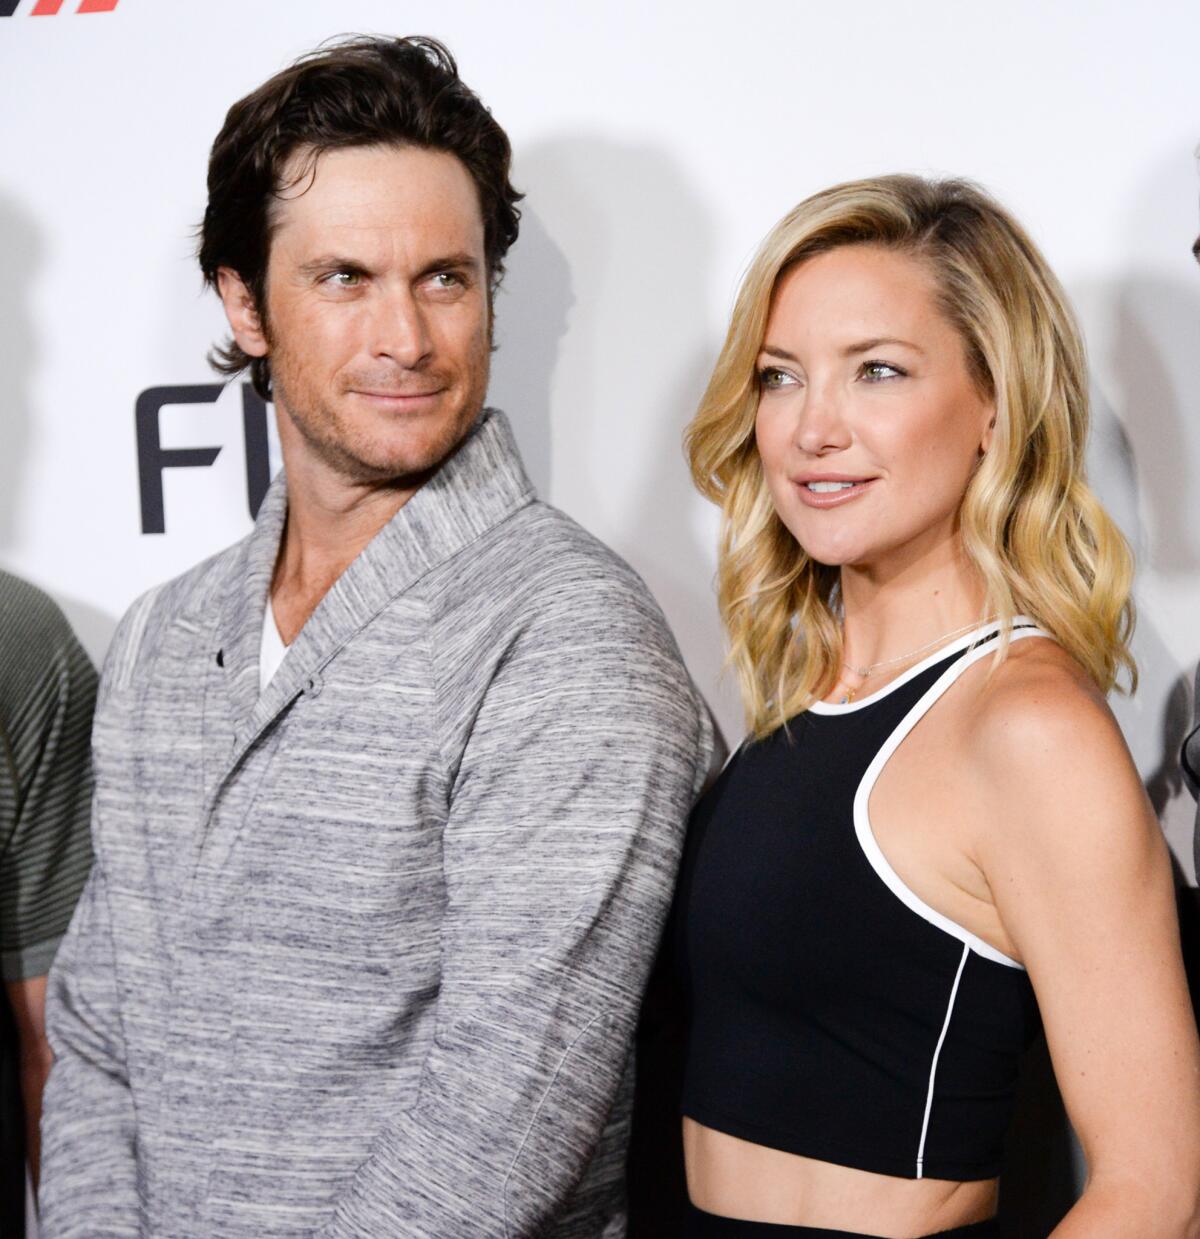 Oliver Hudson and Kate Hudson participate in the official launch of FL2 Active Wear by Fabletics at the Gramercy Park Hotel in New York on June 4.